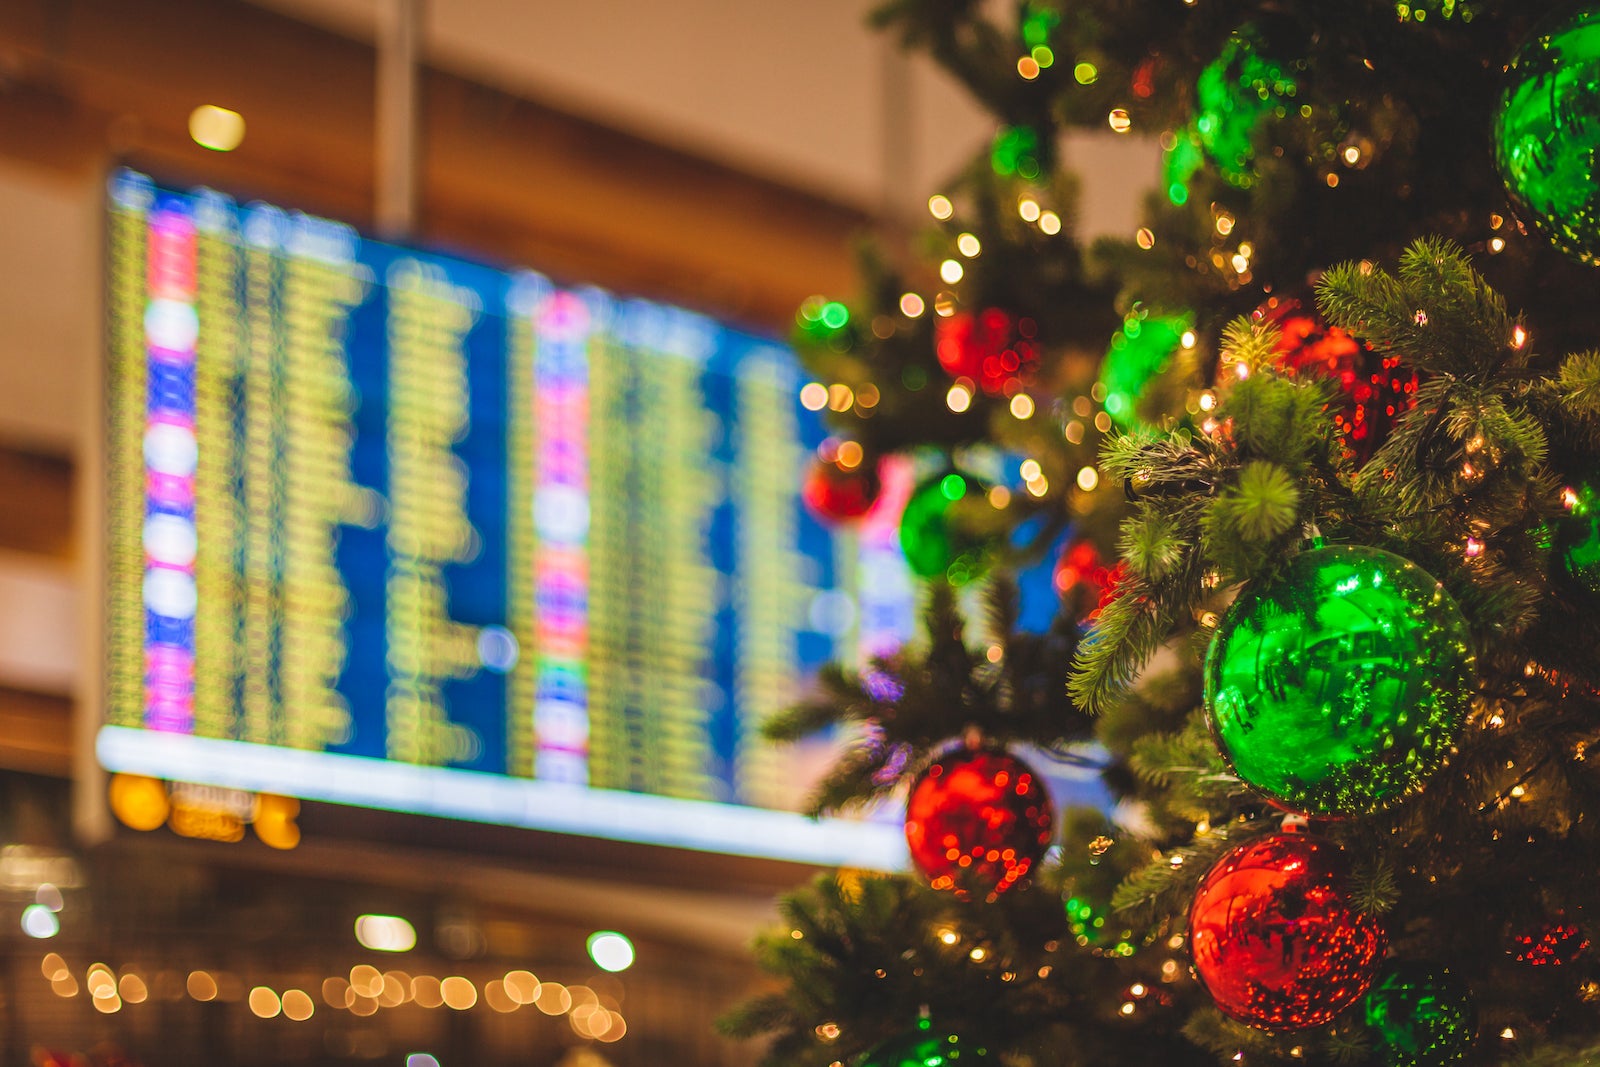 OneTravel's Top Tips for Traveling During the Holidays